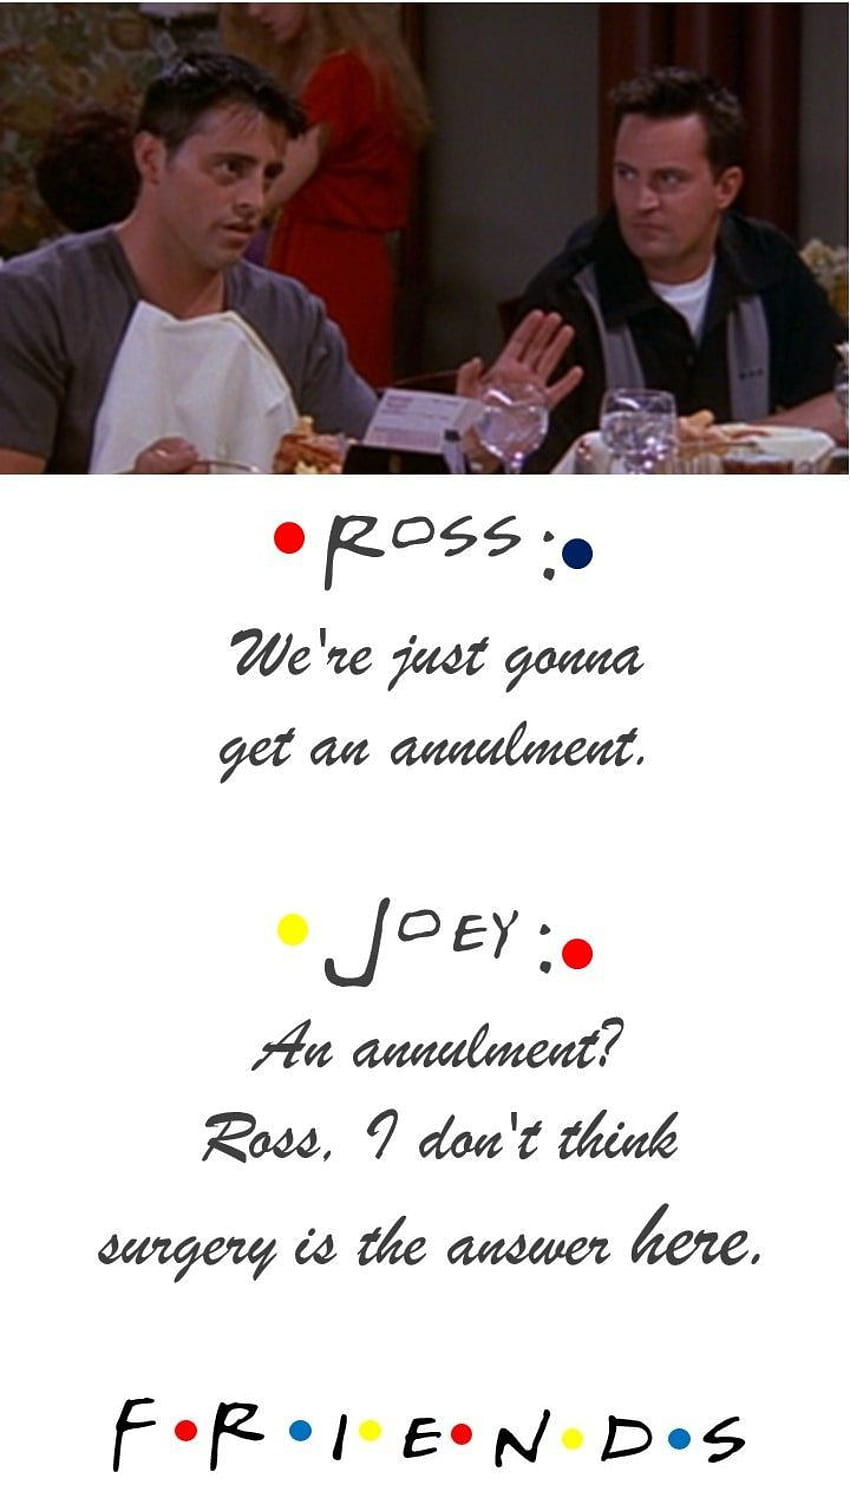 FRIENDS TV show quotes Ross: We're just gonna get an annulment. Joey: An annulment? Ross, I don't think s. Friends tv show quotes, Friends tv show, Friends tv, Joey Tribbiani Quotes HD phone wallpaper